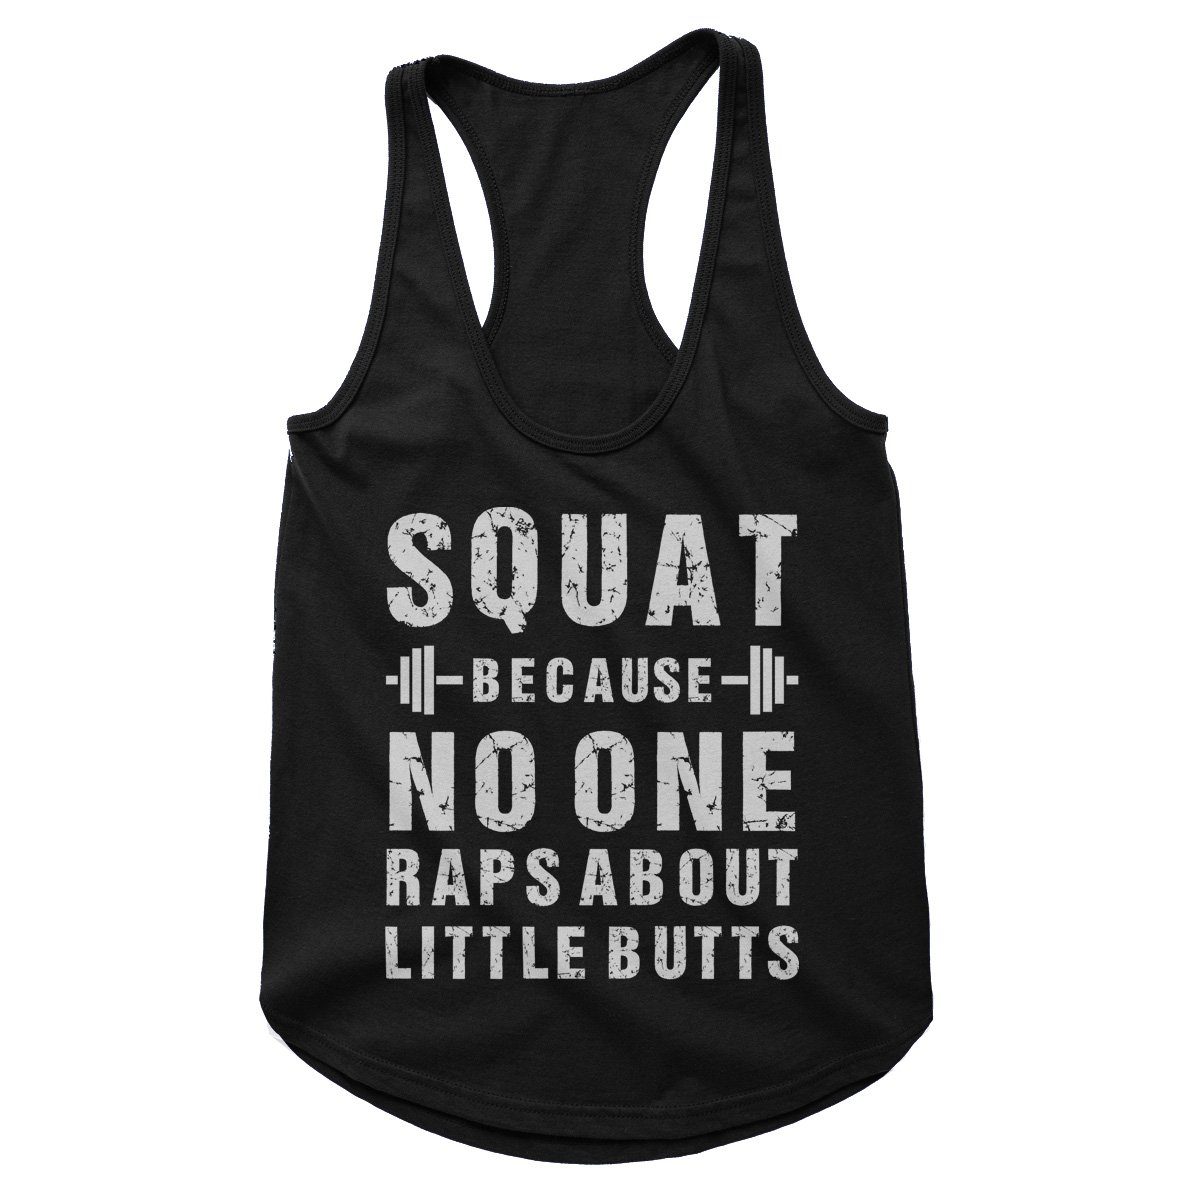 Squat Tank Top, Squat Because Nobody Raps About Little Butts, Funny Work Out  Tank, Womens Fitness Apparel, Funny Gym Shirt, Motivation 